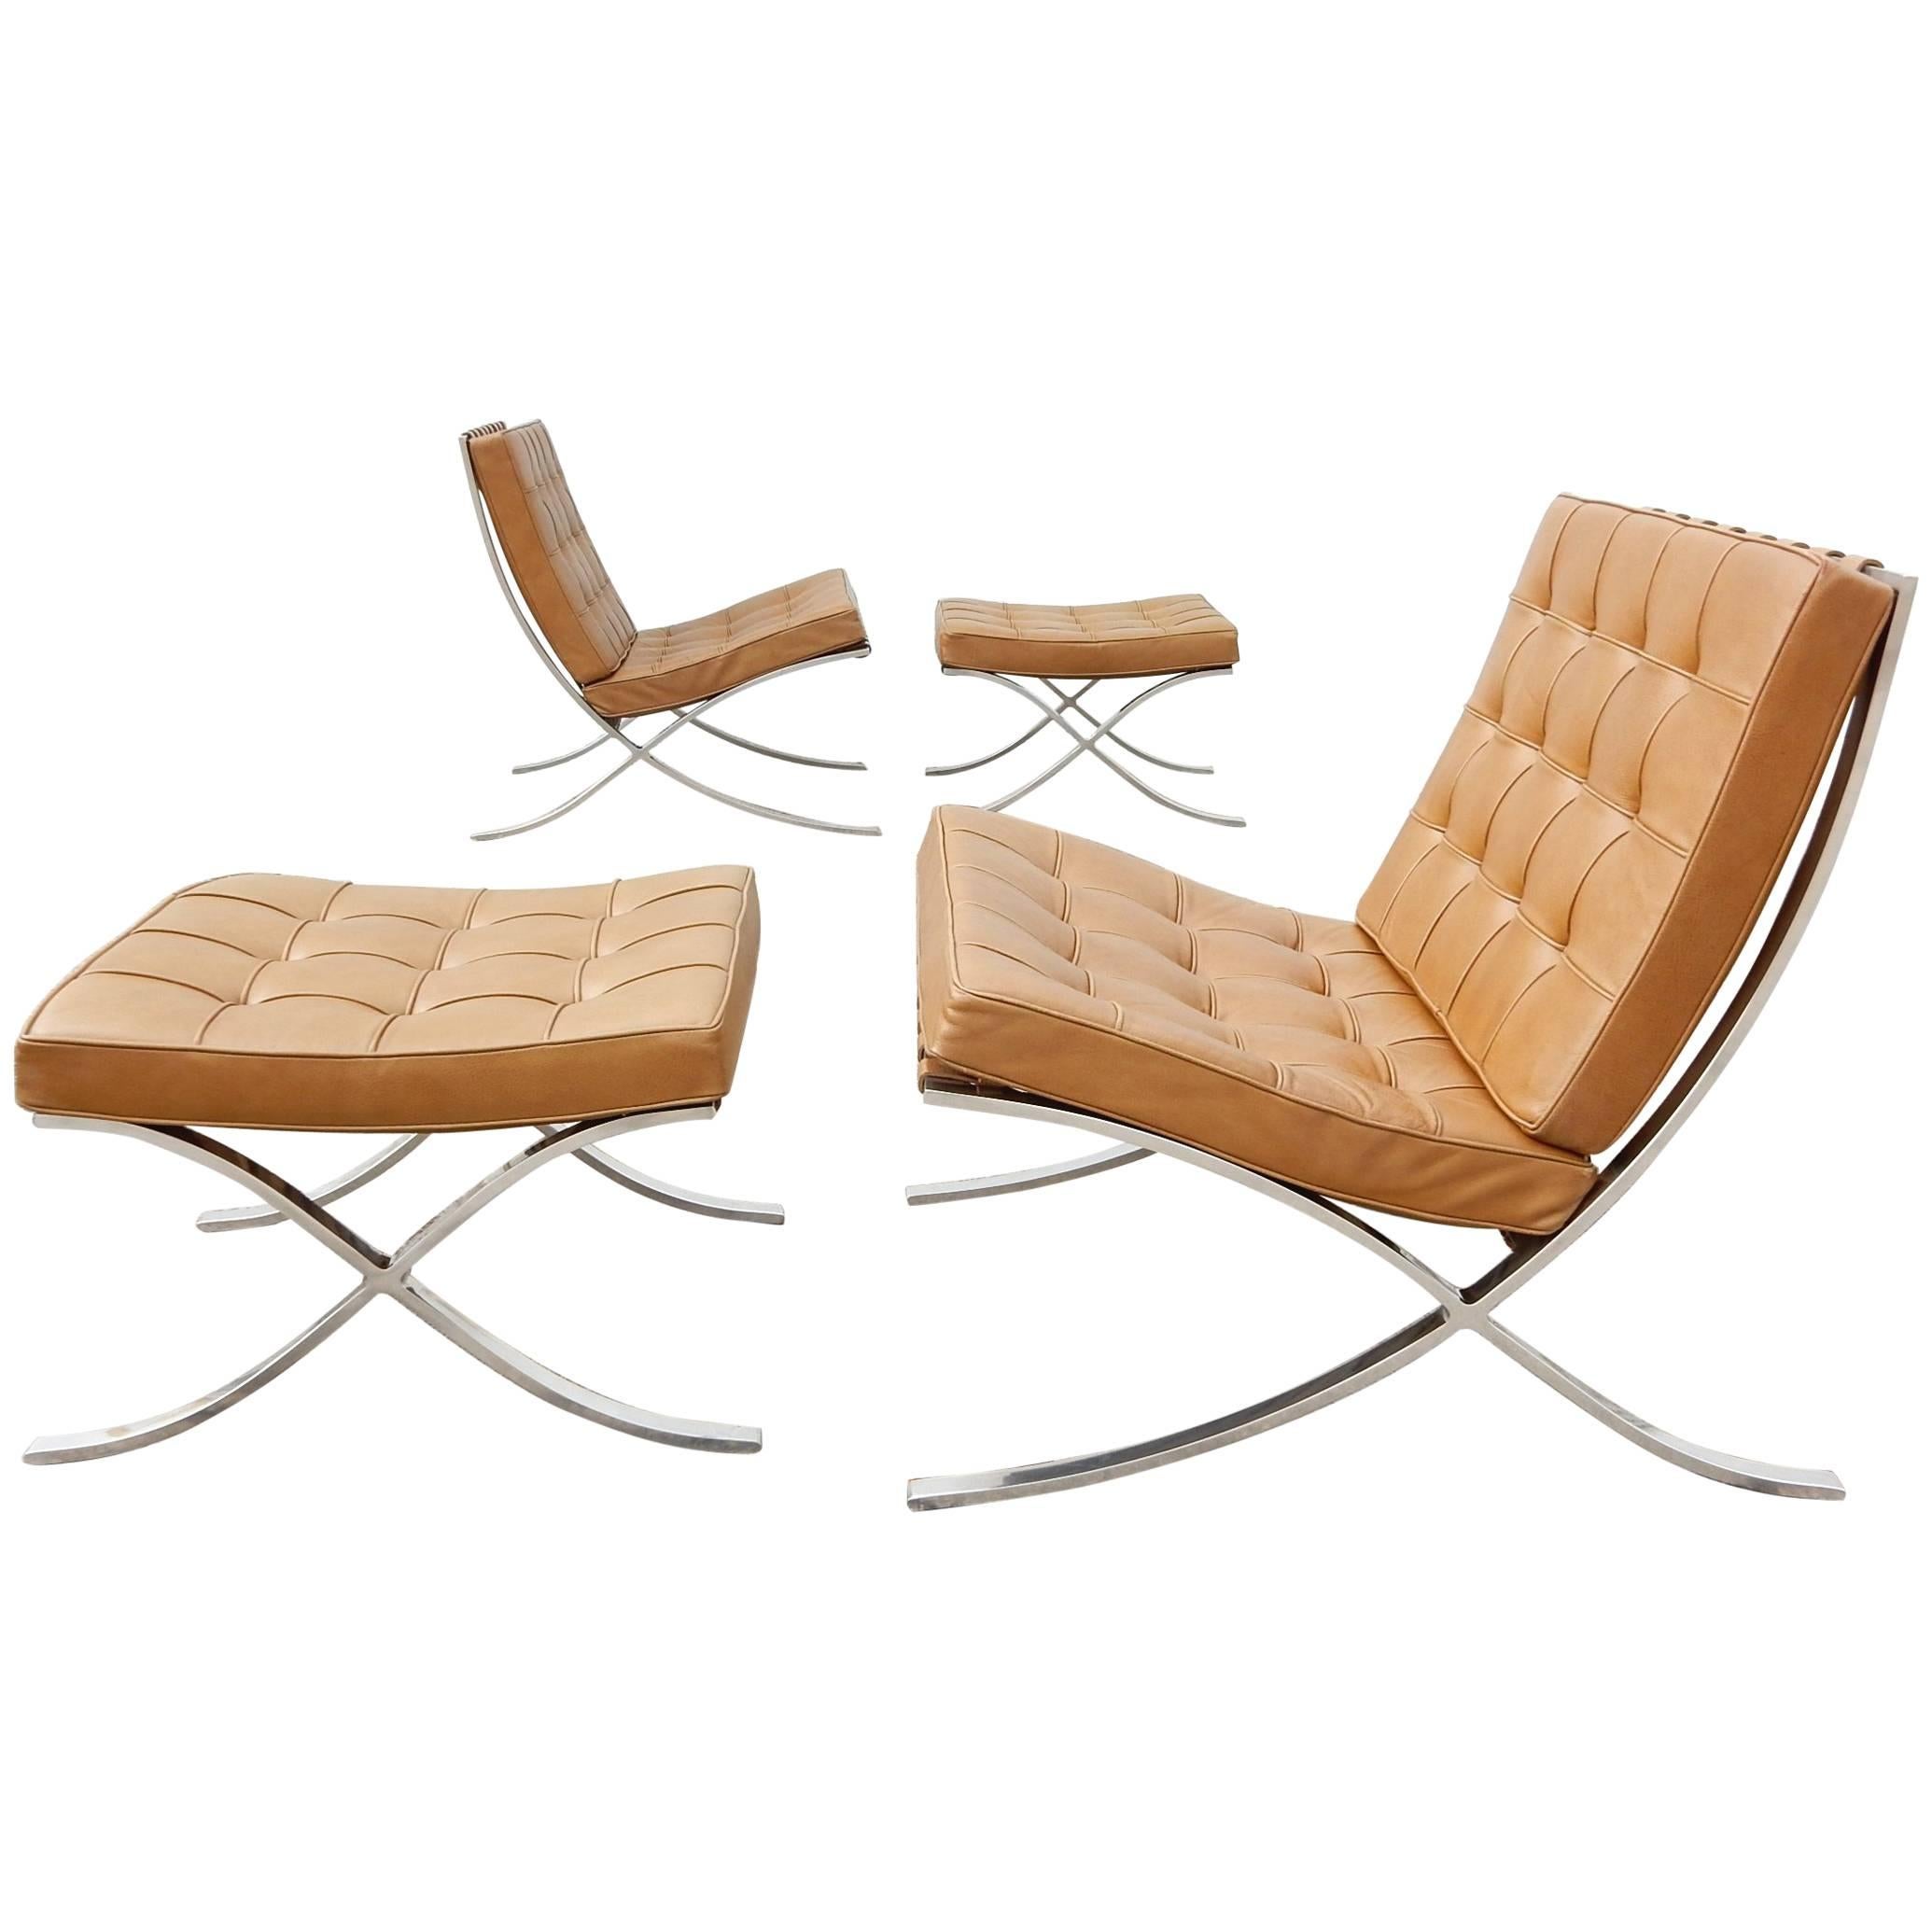 Ludwig Mies van der Rohe Barcelona Chairs and Ottomans by Knoll, 1969